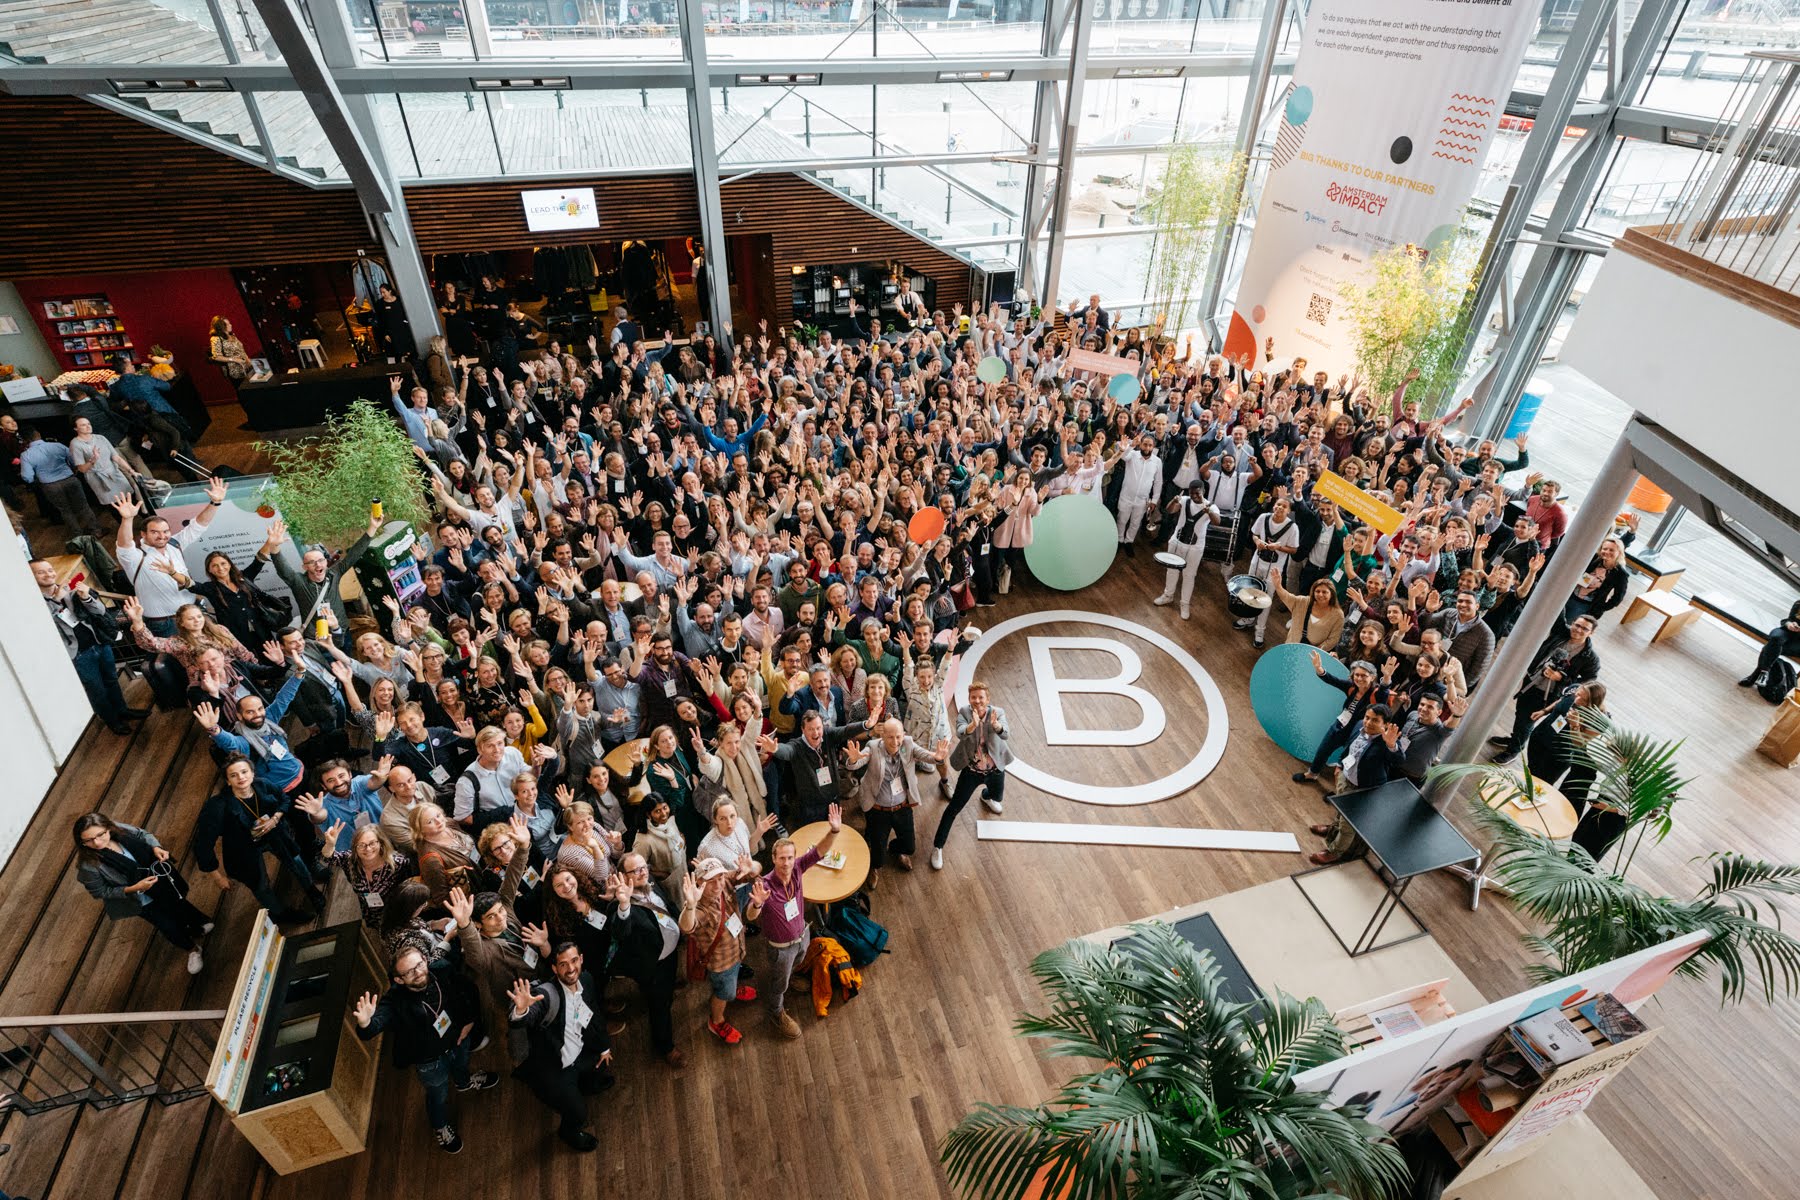 People from the B Corp movement standing around a large B written onto the floor